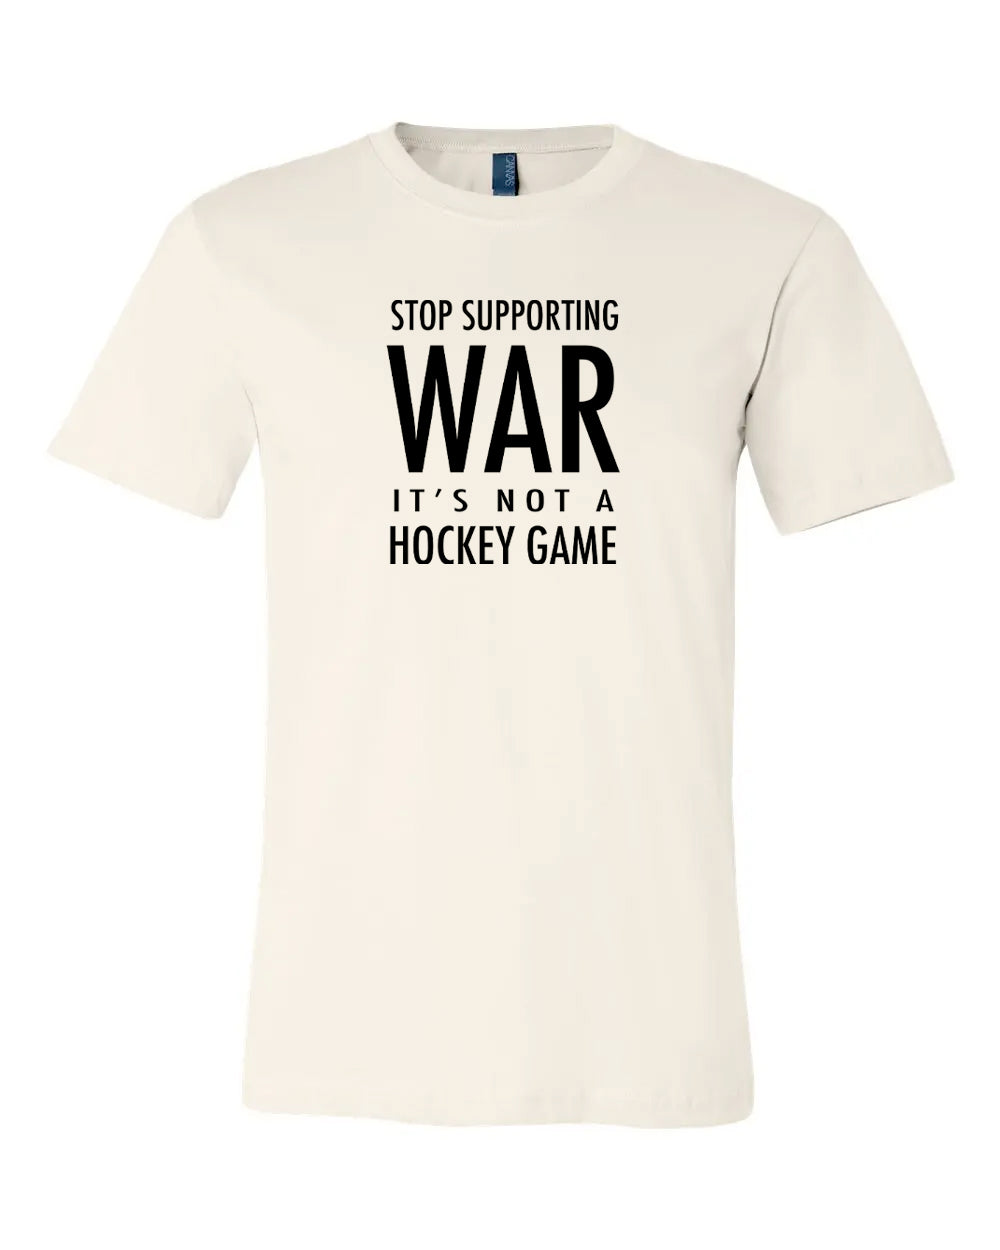 STOP SUPPORTING WAR T-Shirts | Unsettled Apparel